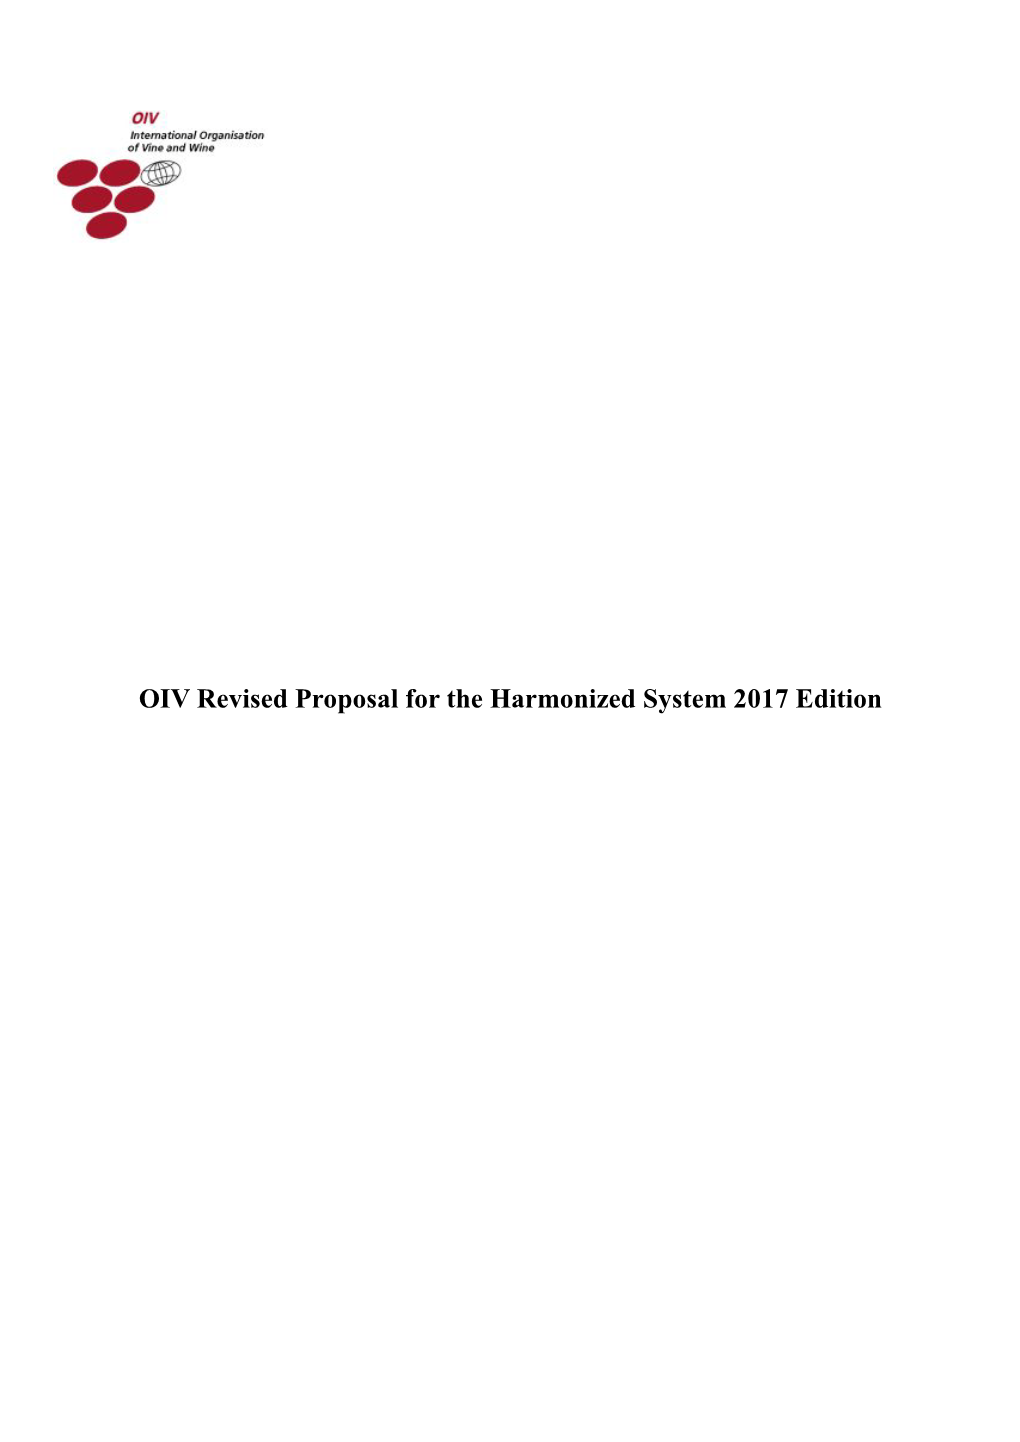 OIV Revised Proposal for the Harmonized System 2017 Edition